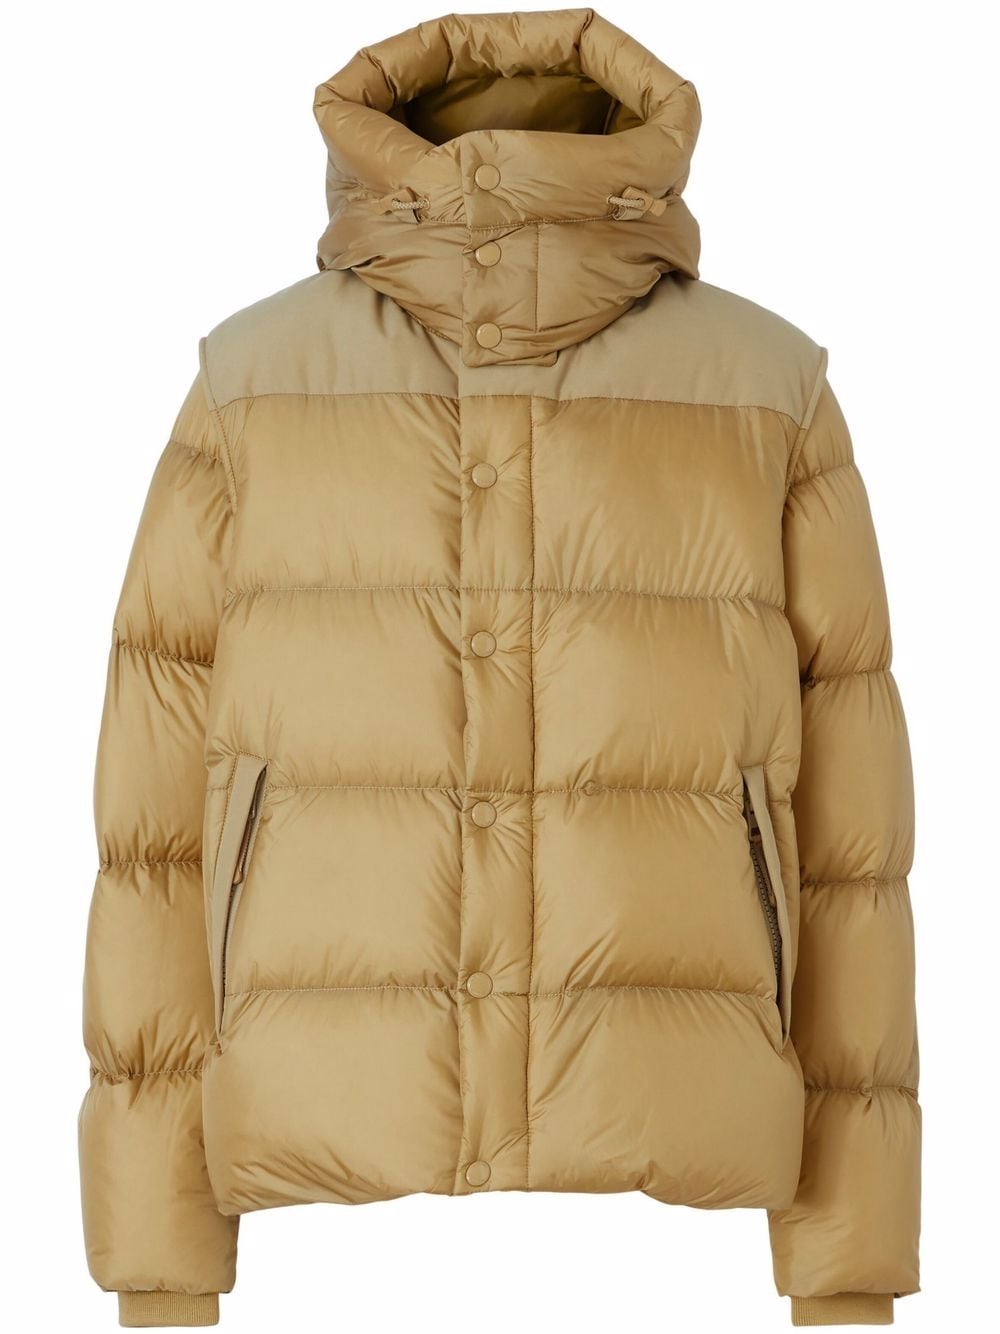 Burberry detachable sleeve hooded puffer jacket - Brown